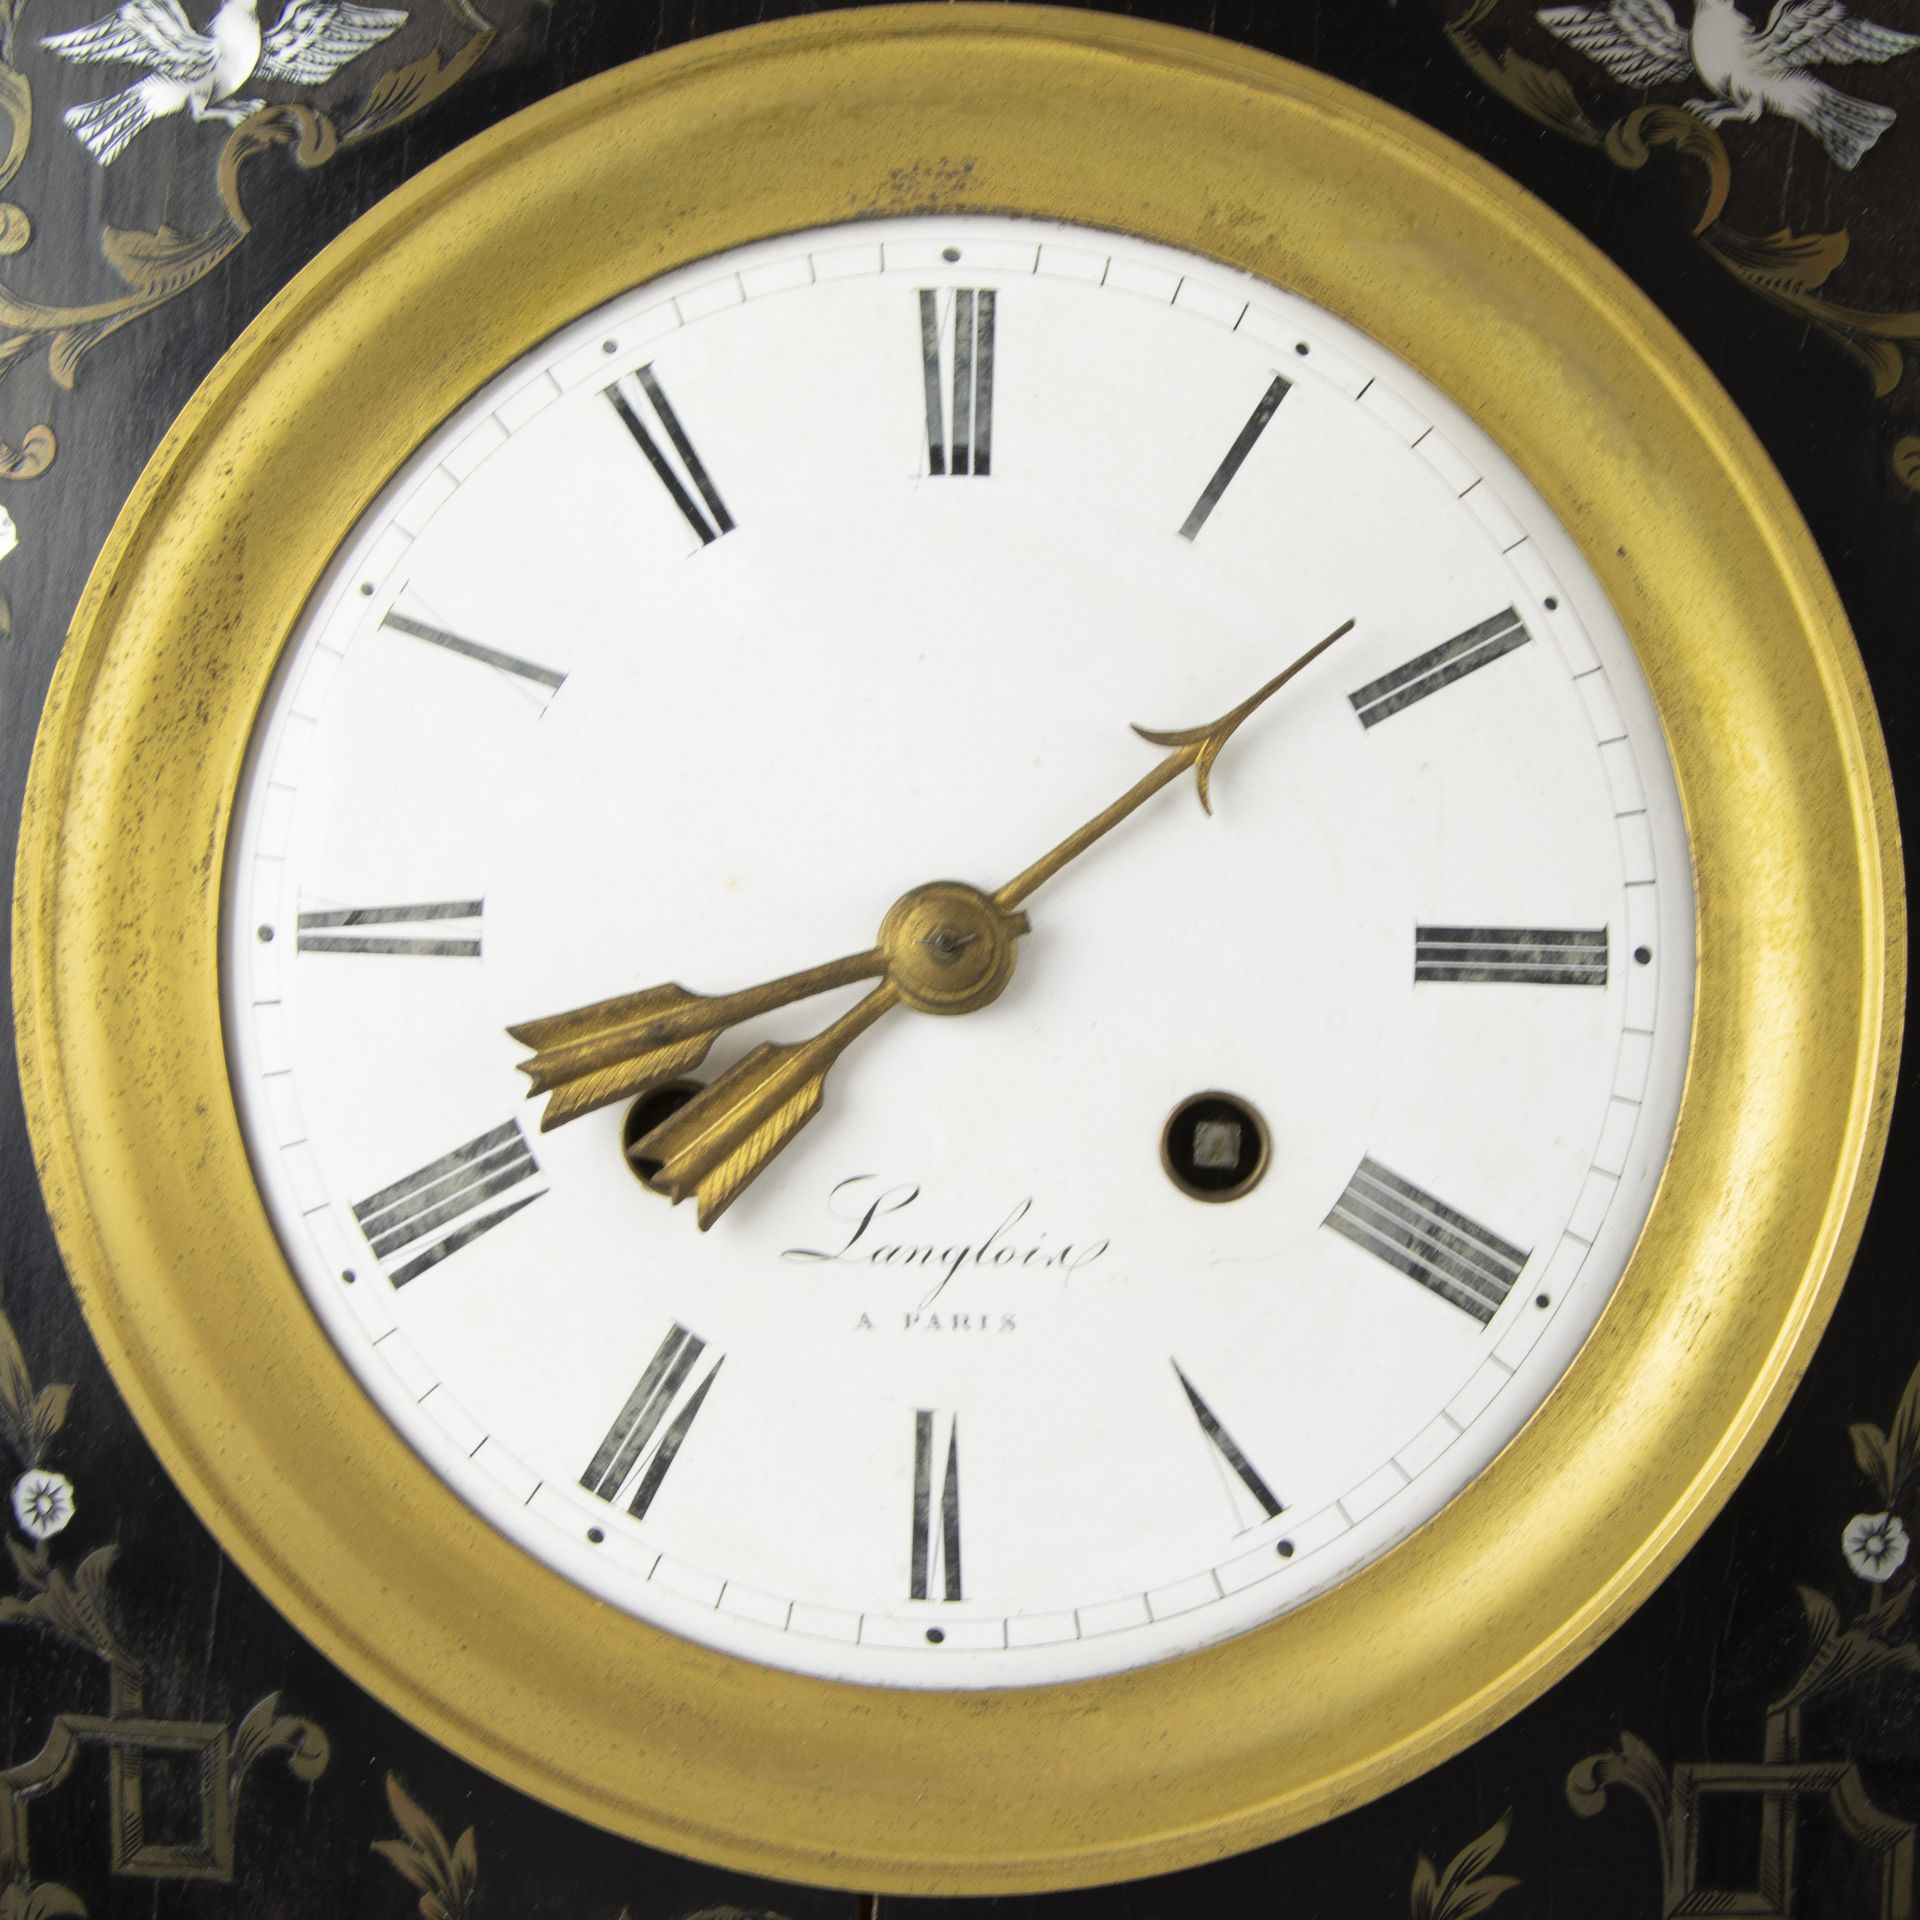 French Napoleon III table clock made of black lacquered wood, decorated with inlay Boulle technique - Image 2 of 3